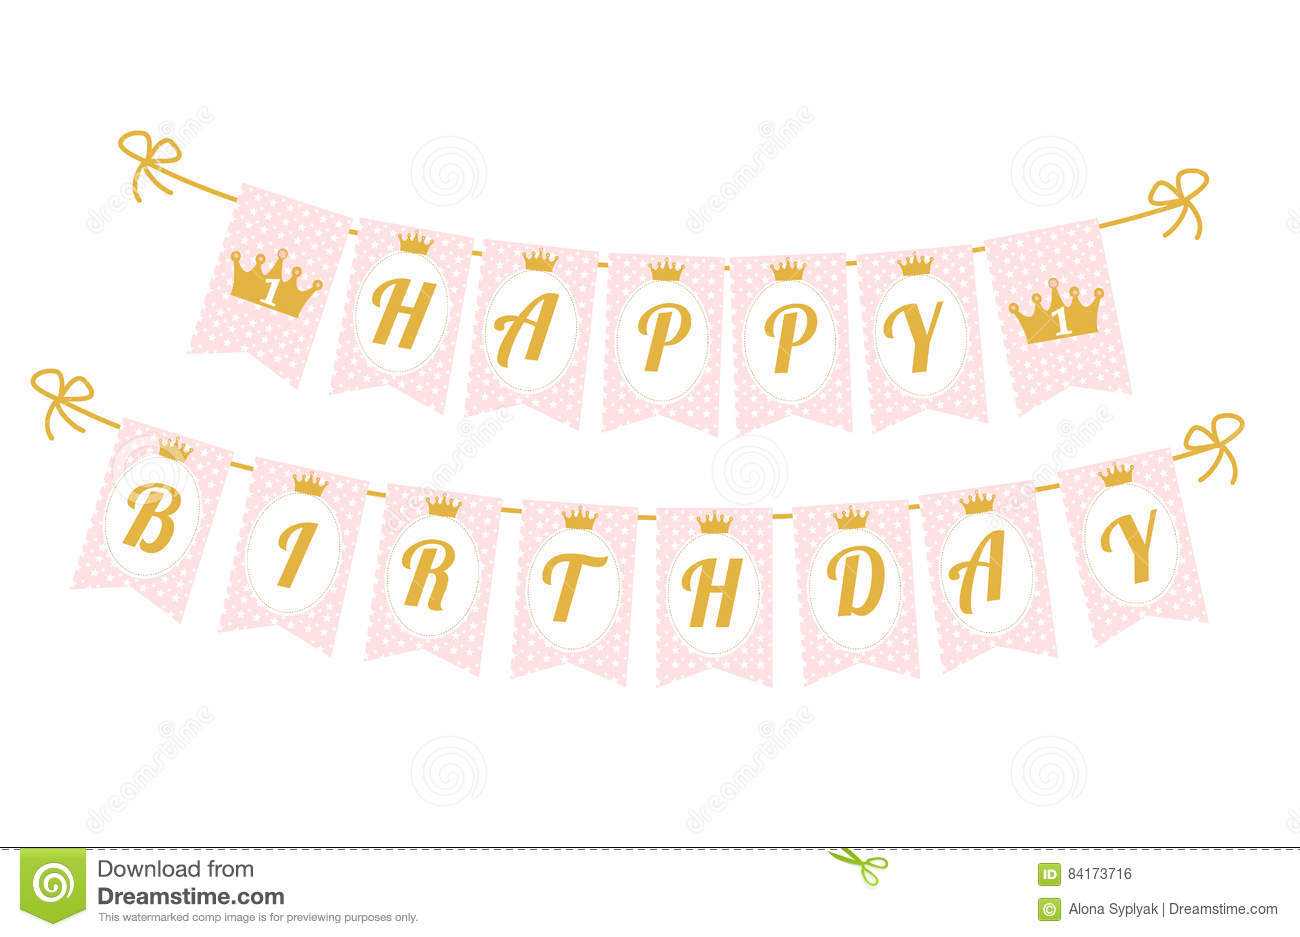 Cute Pennant Banner As Flags With Letters Happy Birthday In In Printable Letter Templates For Banners